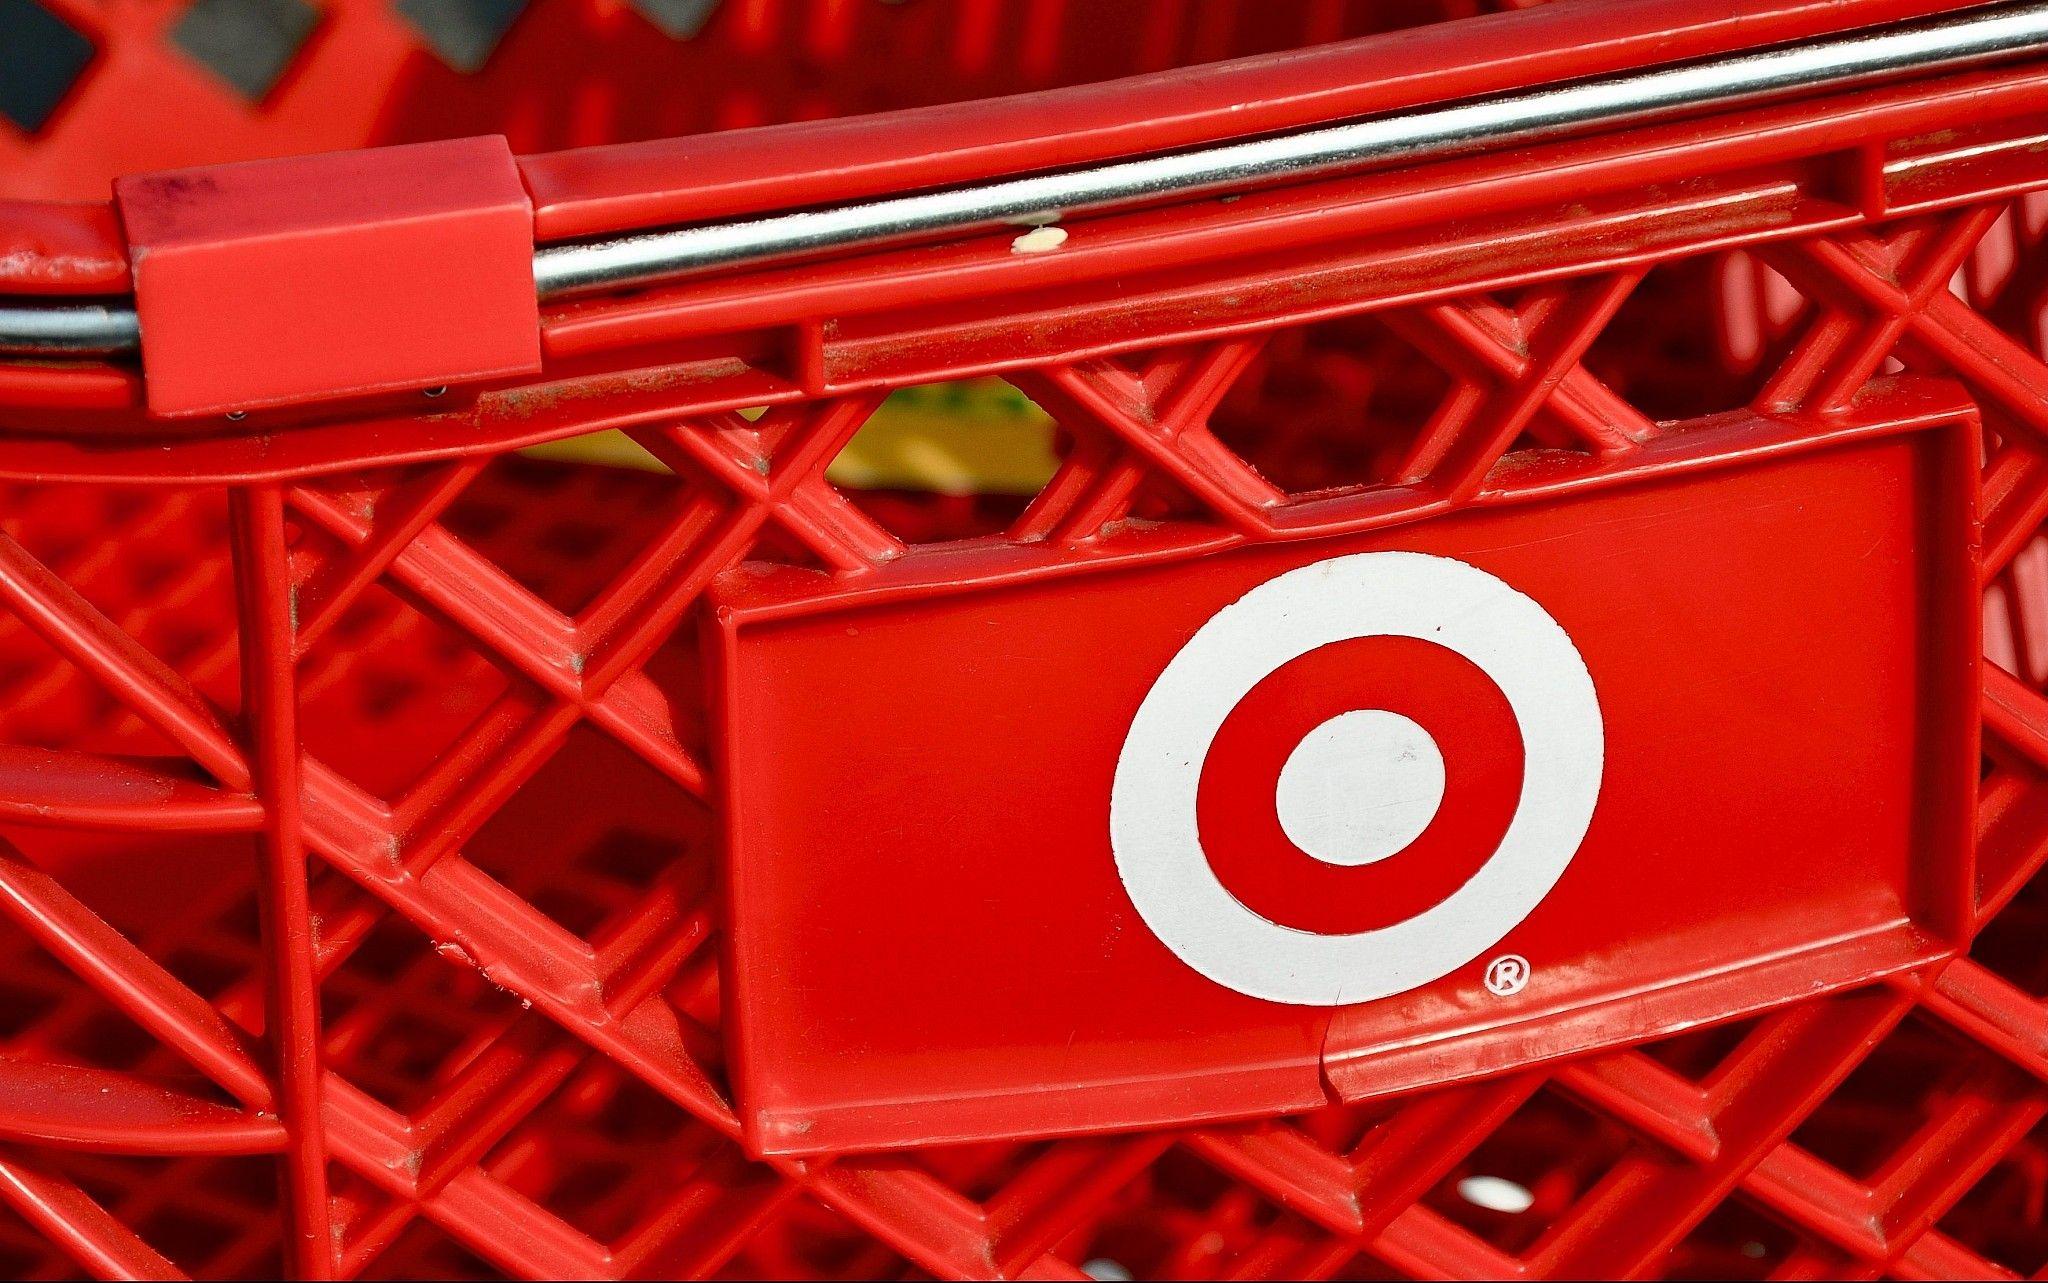 American Retailer Red Logo - Target apologizes for canceling orders to Israel, citing high demand